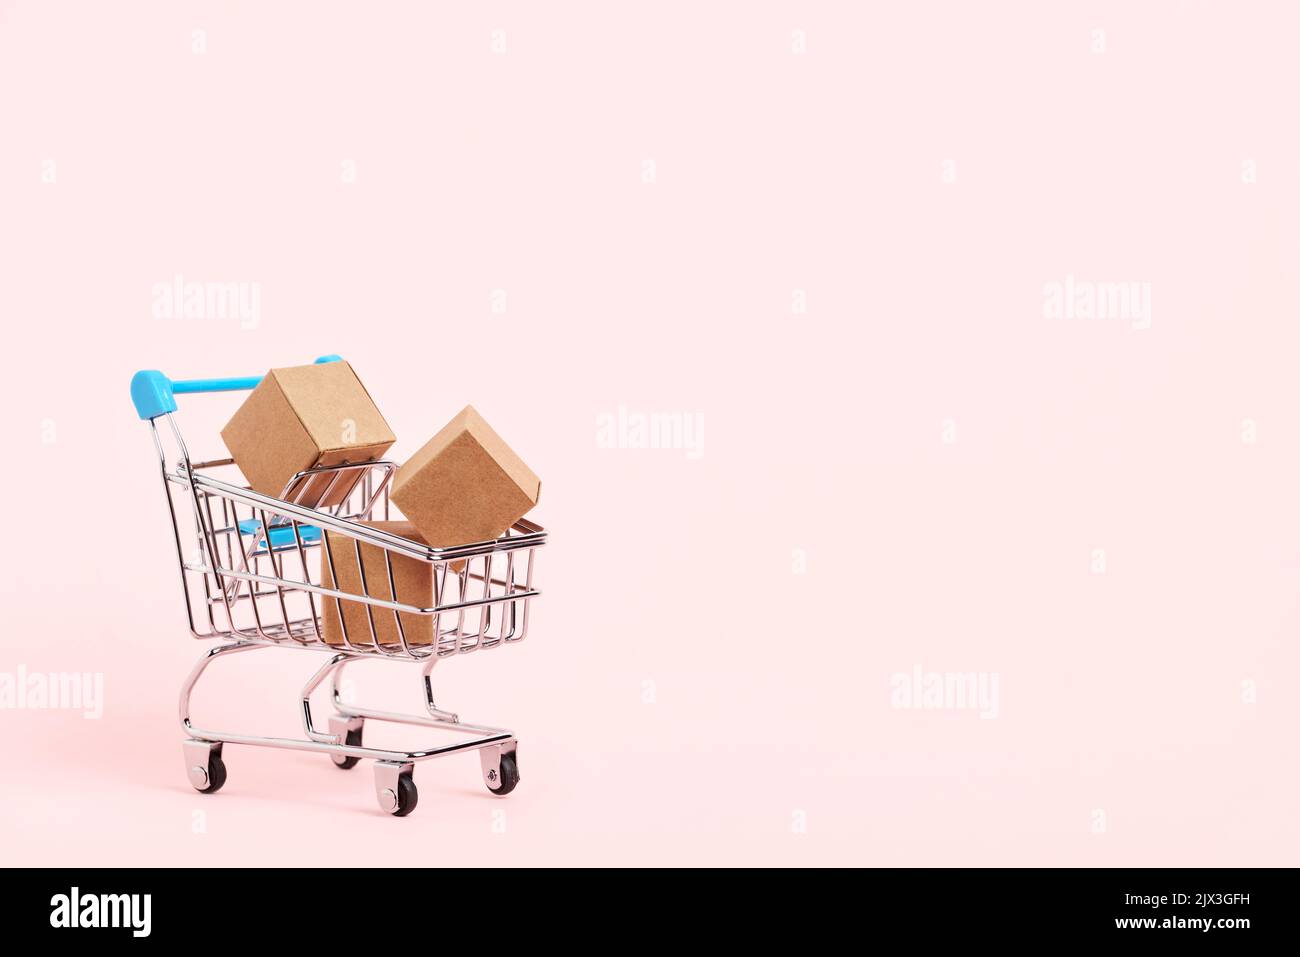 Shopping cart with cardboard boxes on a pastel pink background. Bright minimalist design with copy space. Concepts: market sales, seasonal discounts, Stock Photo